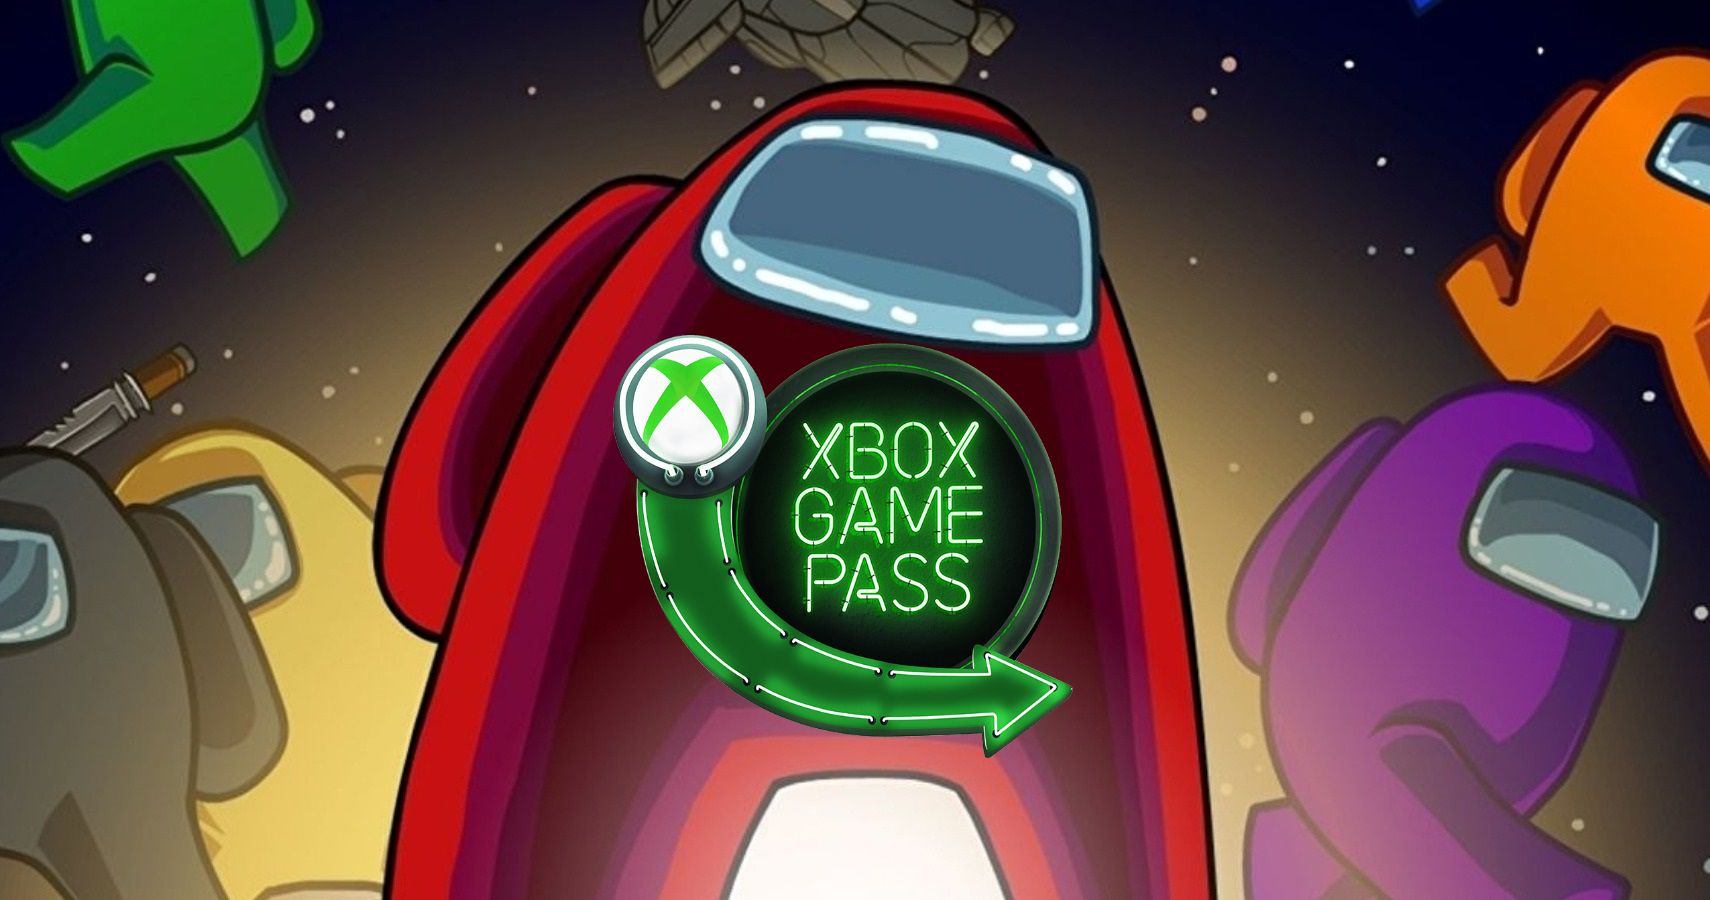 can i use game pass for pc on xbox